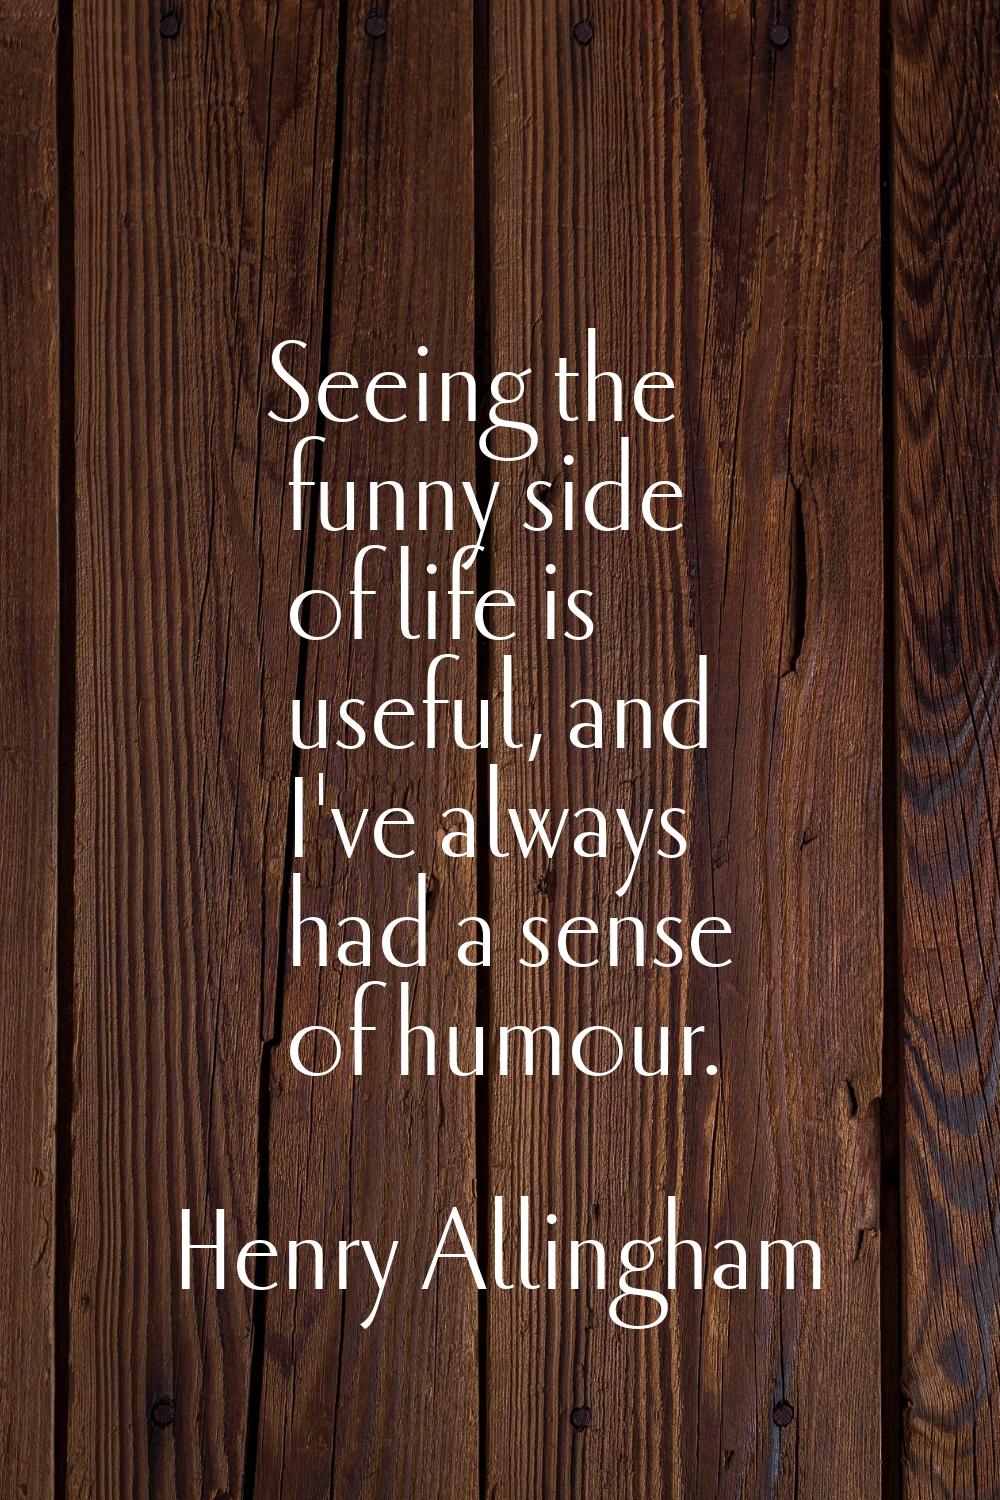 Seeing the funny side of life is useful, and I've always had a sense of humour.